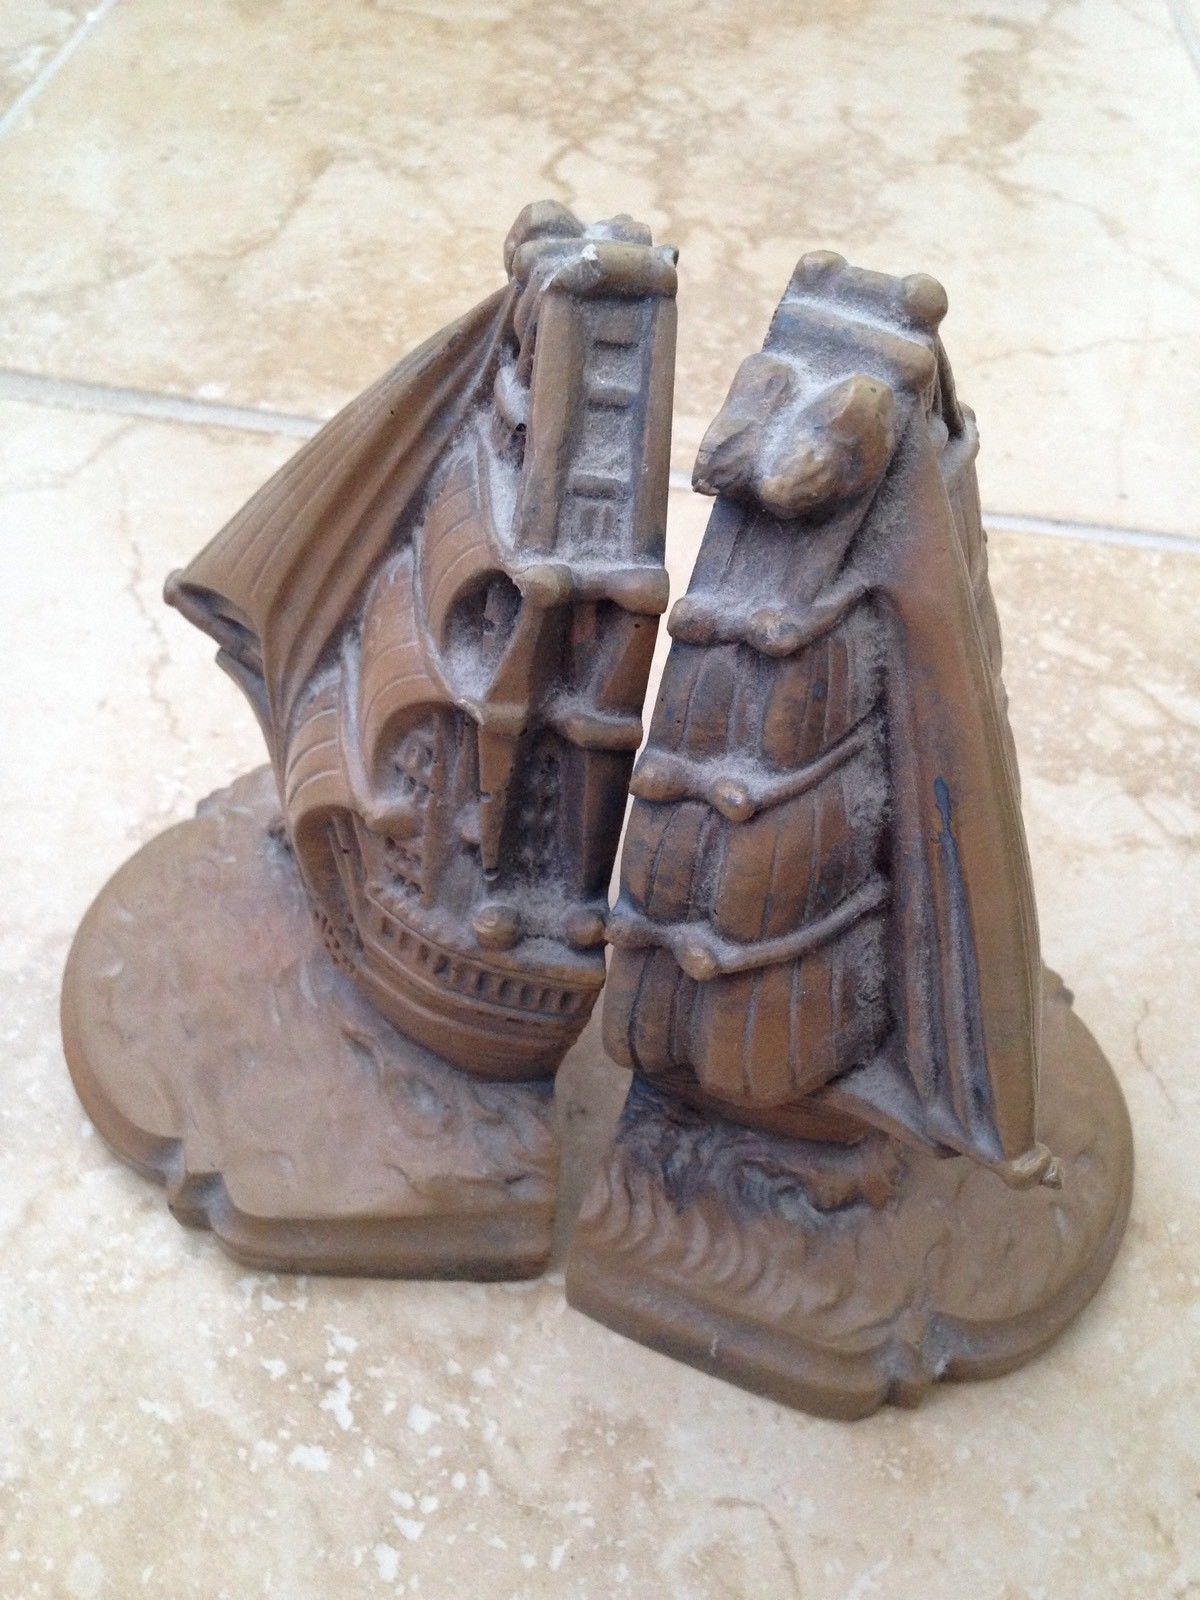 keeping your favorite tales of adventure safe between 6" sailboat bookends - $49.99